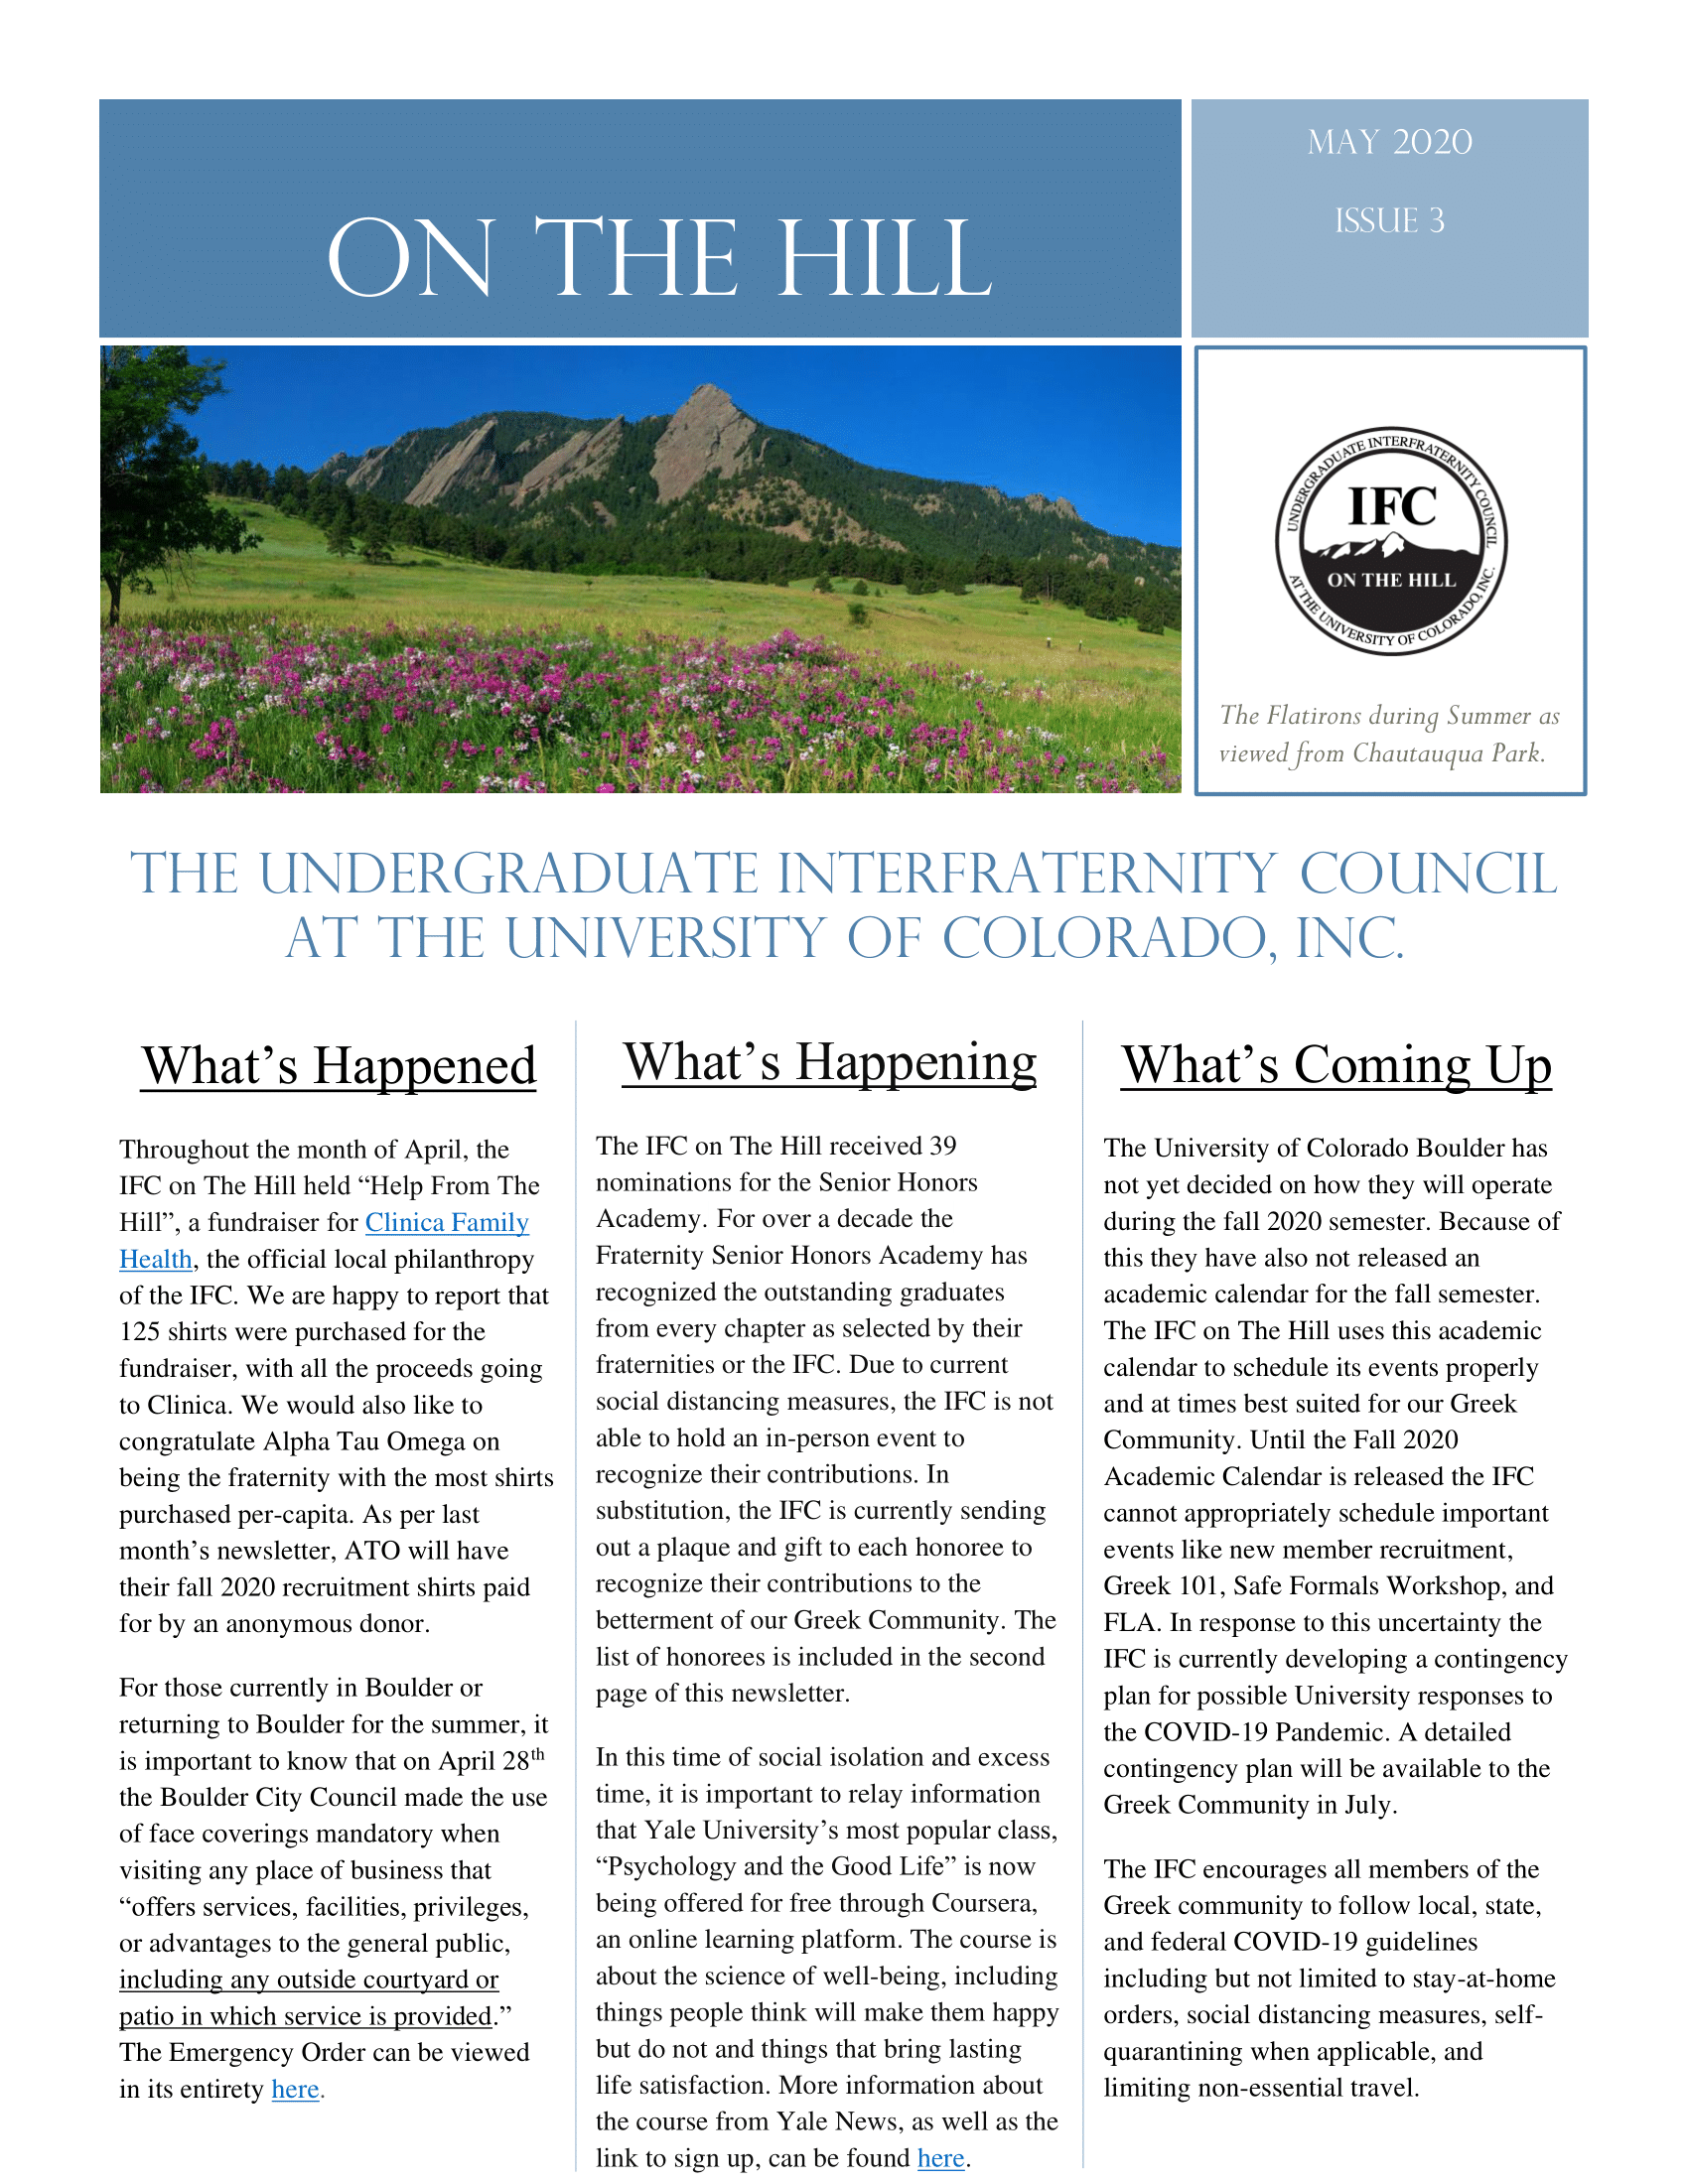 On The Hill Issue #3-1.png